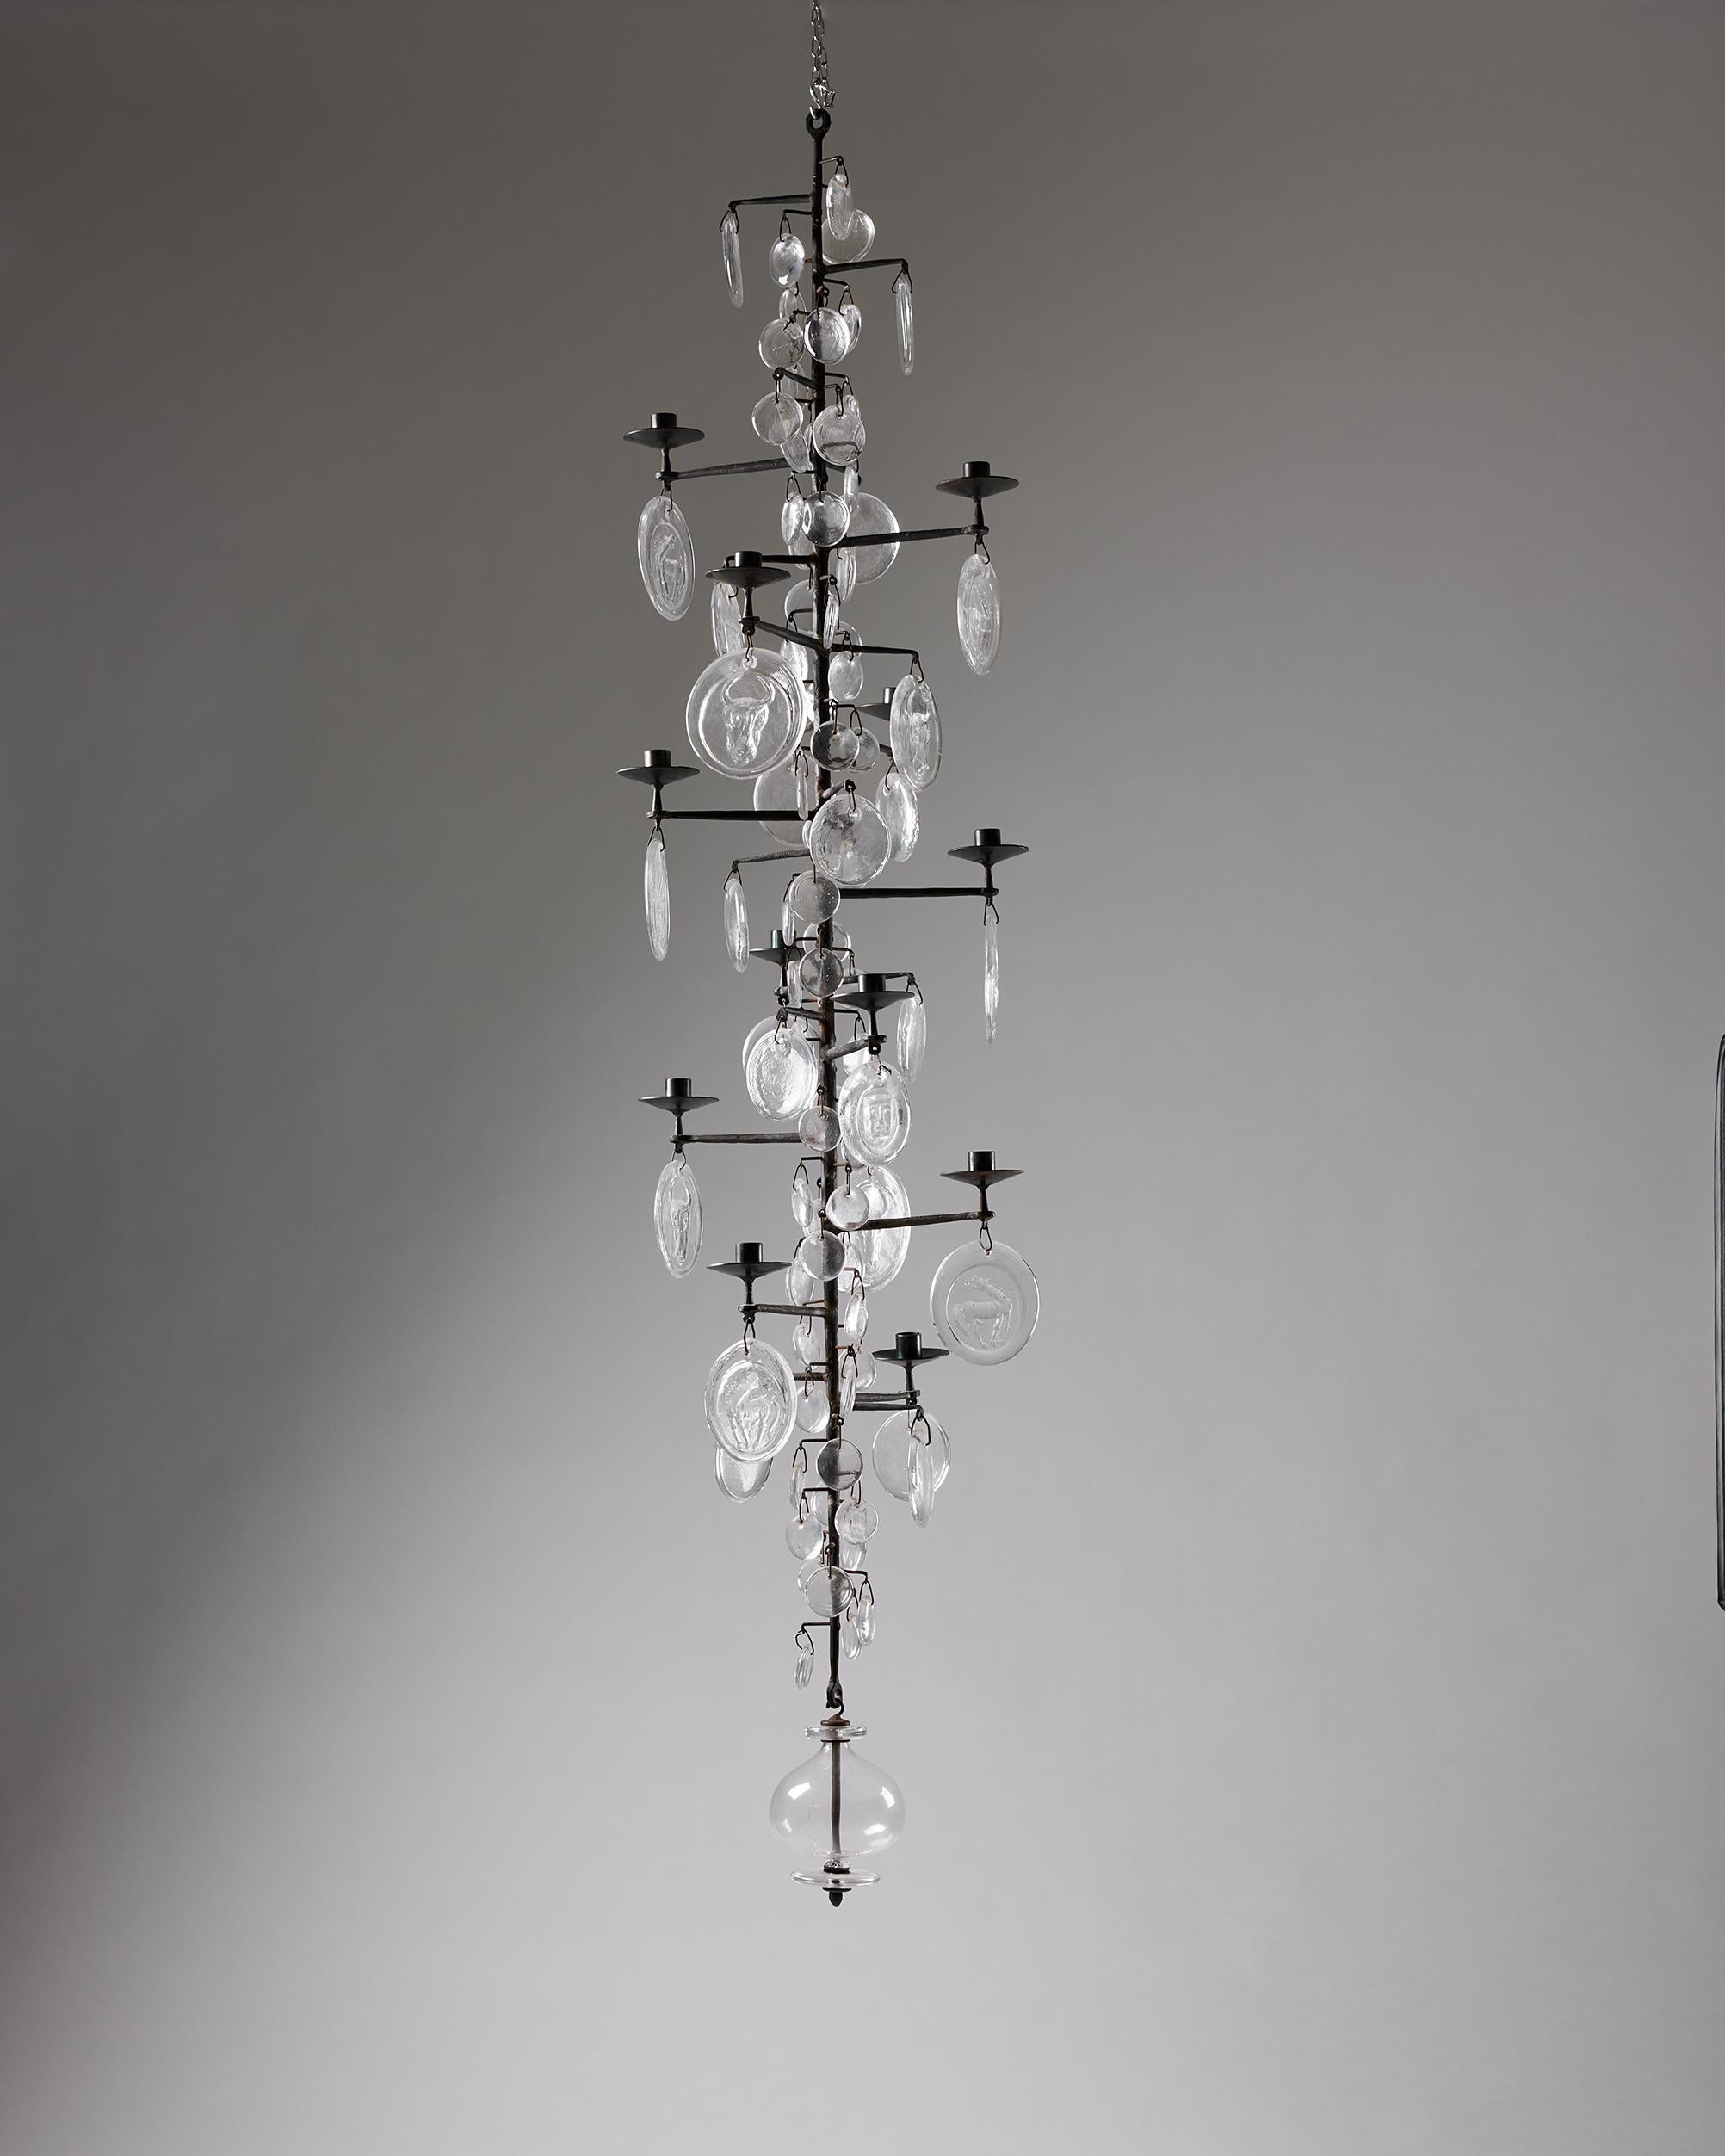 Chandelier model 341 designed by Erik Höglund for Boda,
Sweden, 1960s.

Wrought iron and glass.

Dimensions:
H: 170 cm / 5' 7''
Diameter: 40 cm / 15 3/4''